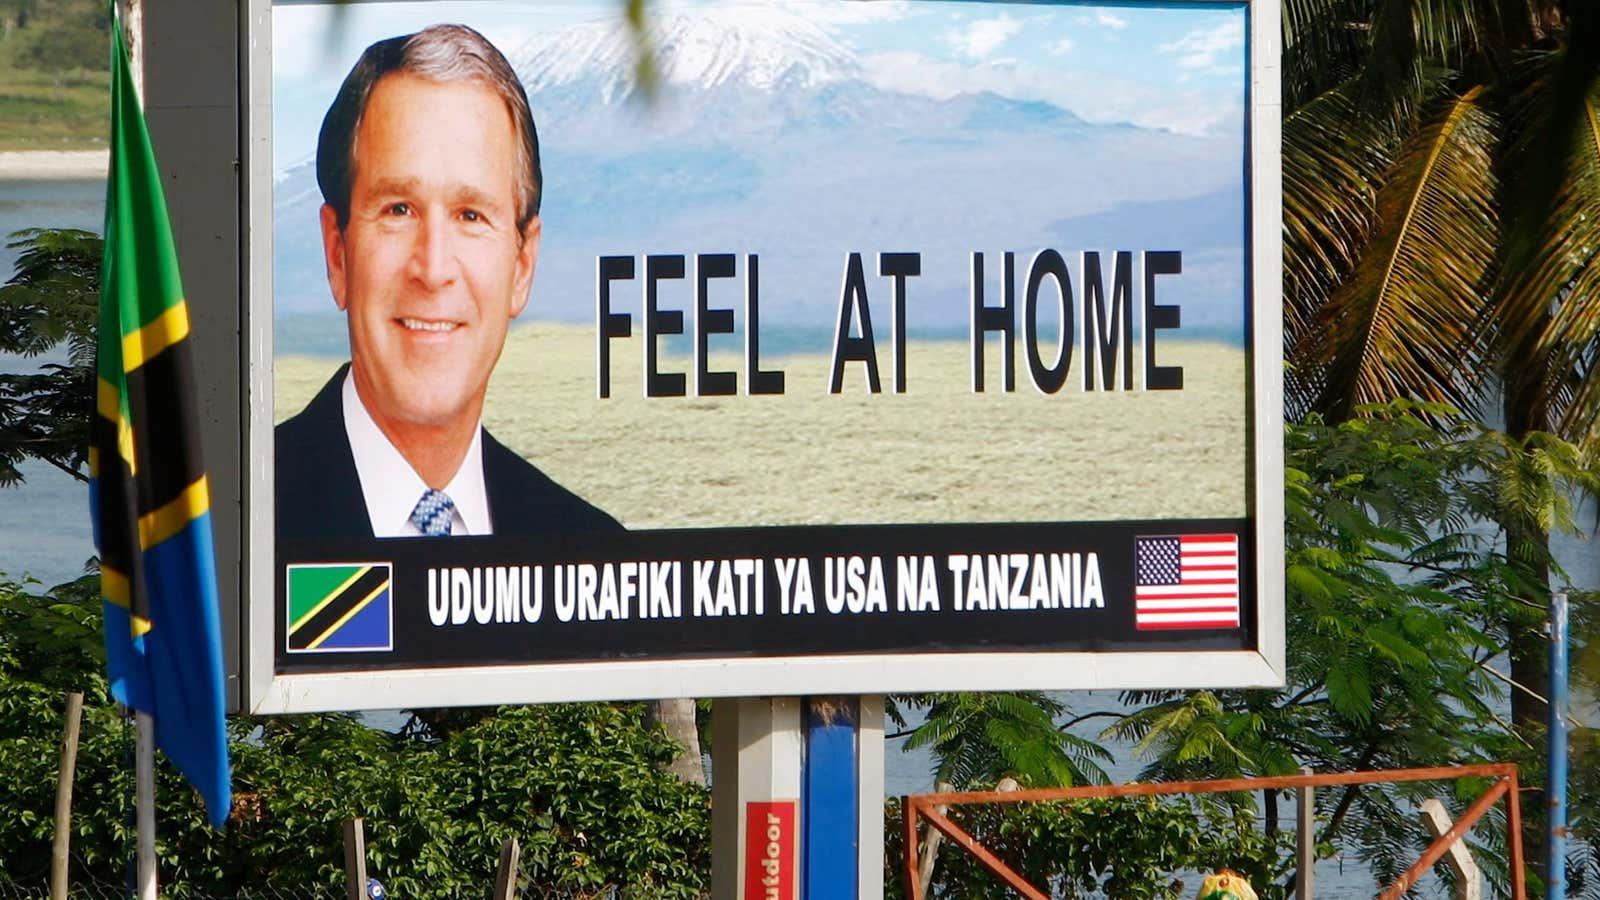 A sign promoting the visit of US president George W. Bush is seen in Dar es Salaam, February 2008.